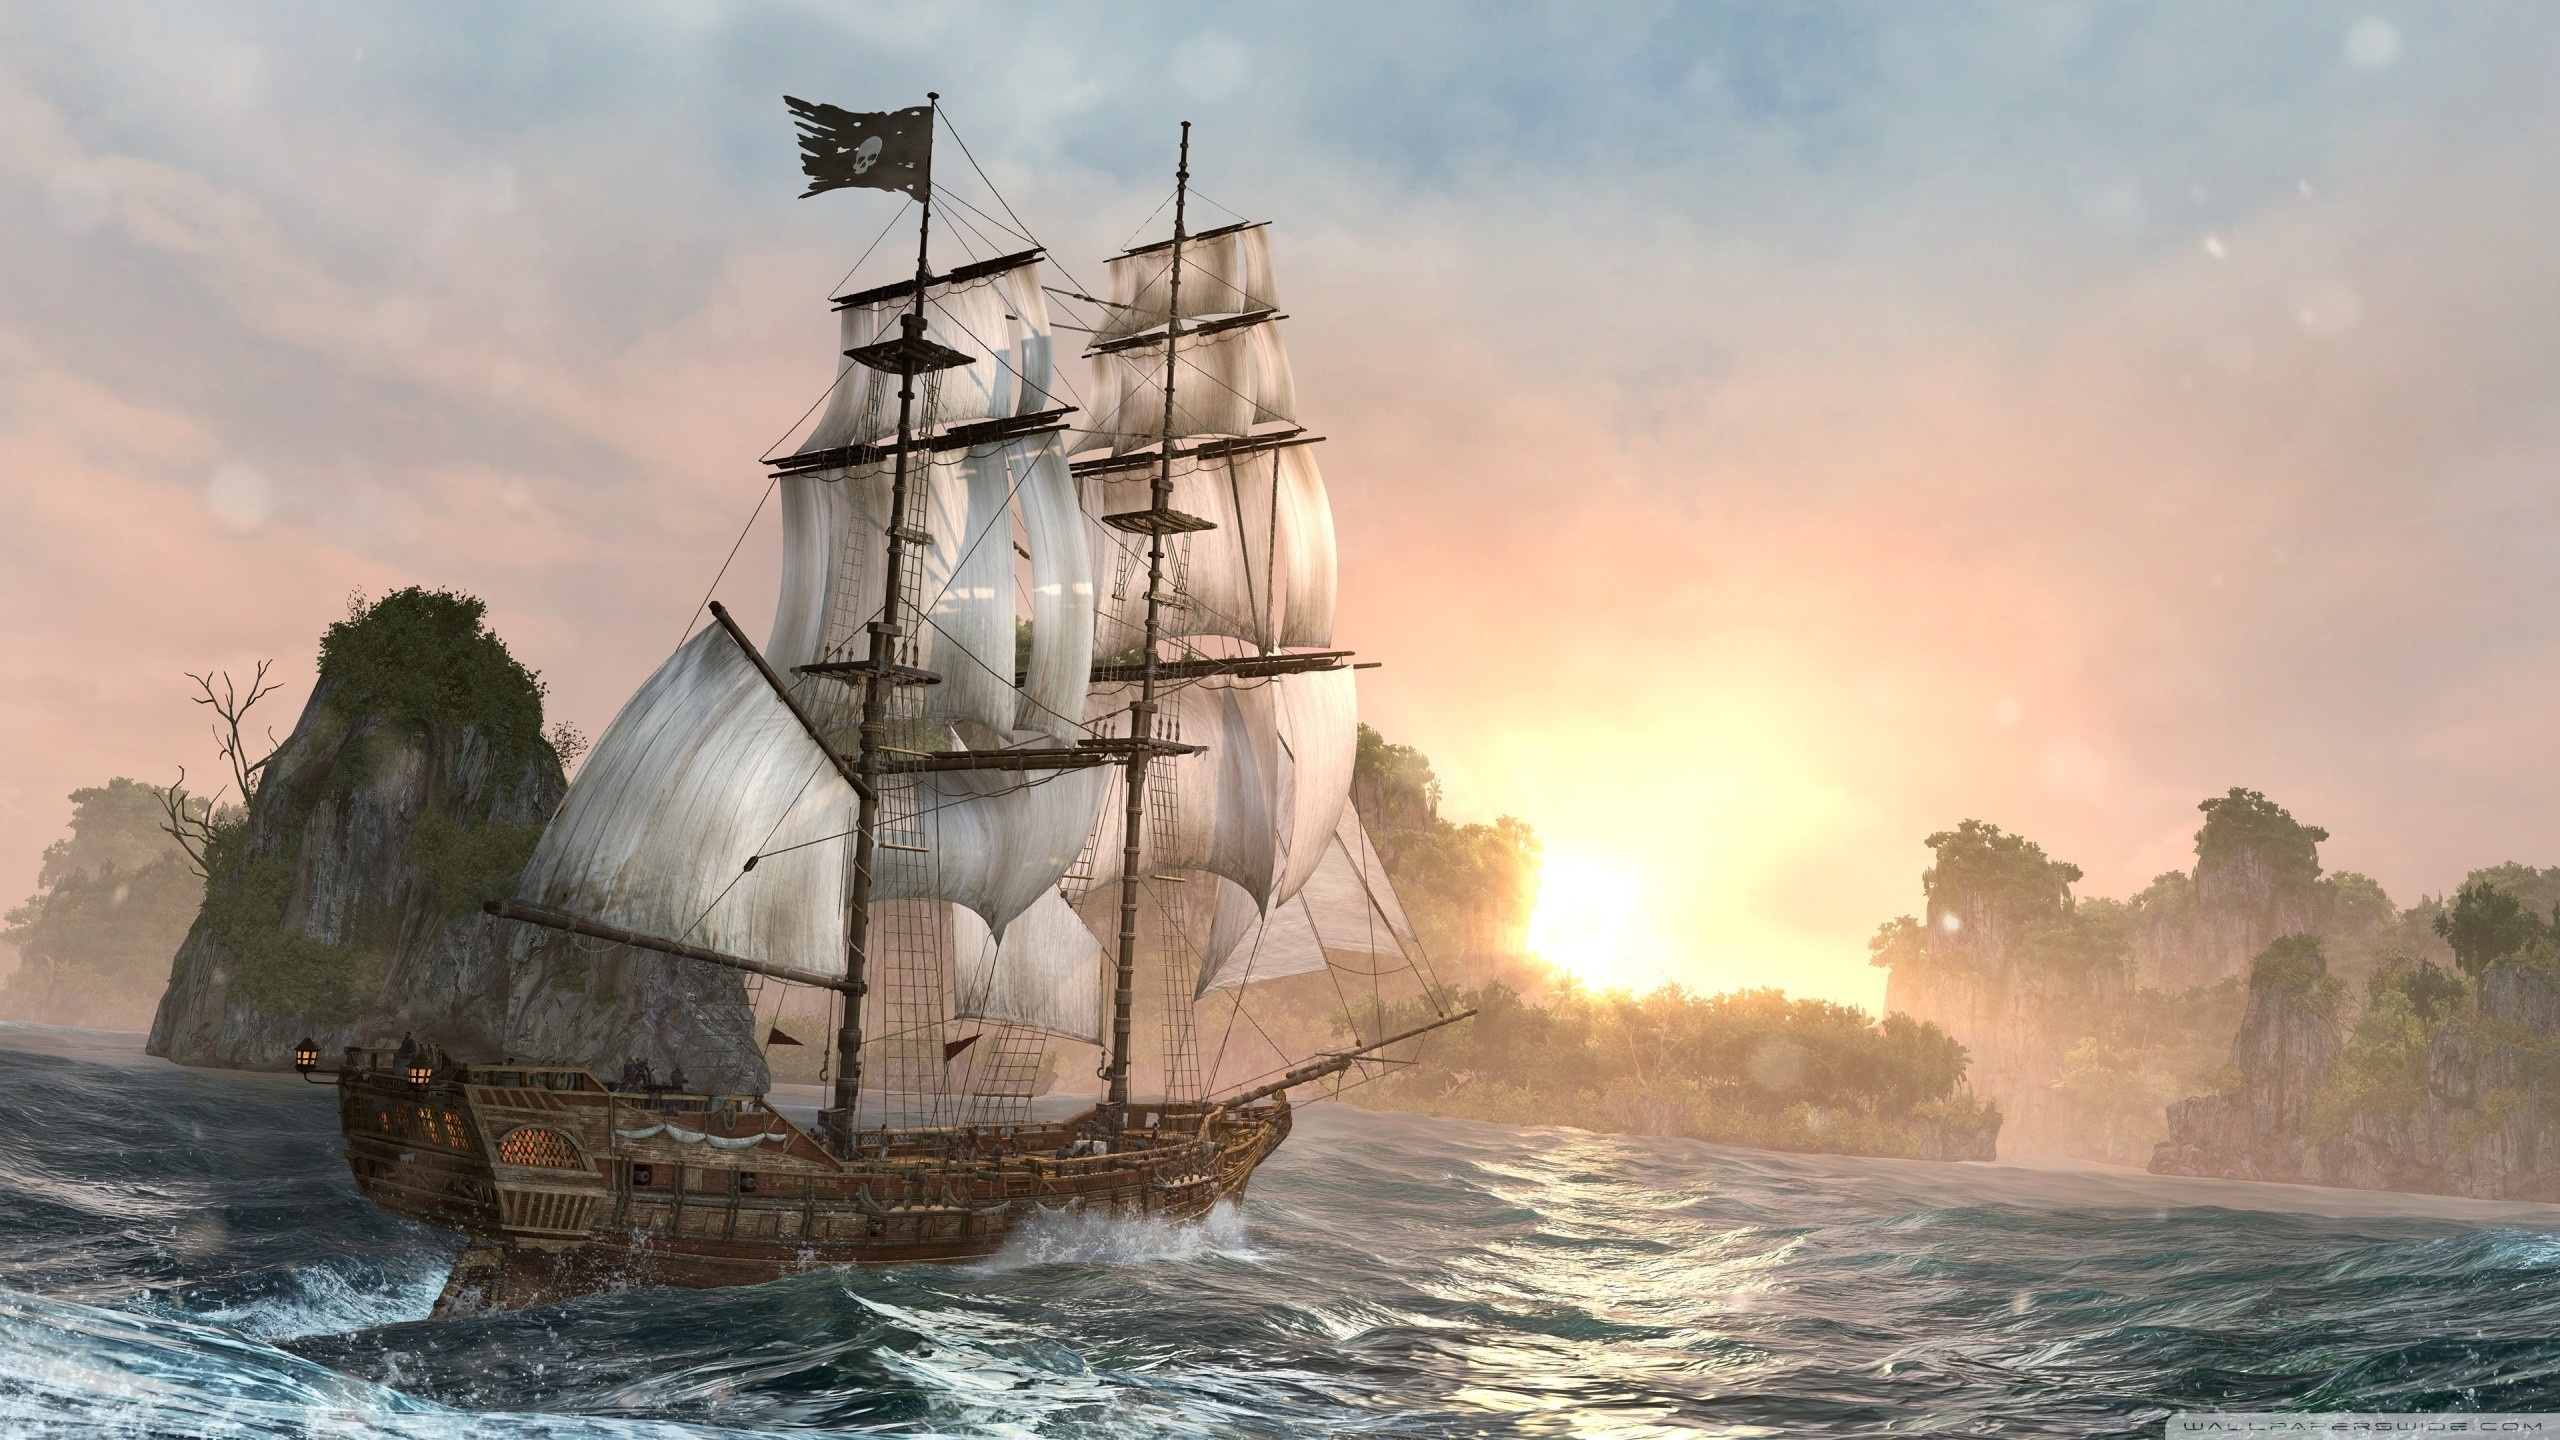 Jackdaw Ship wallpapers, Gaming, Pics, Background pictures, 2560x1440 HD Desktop